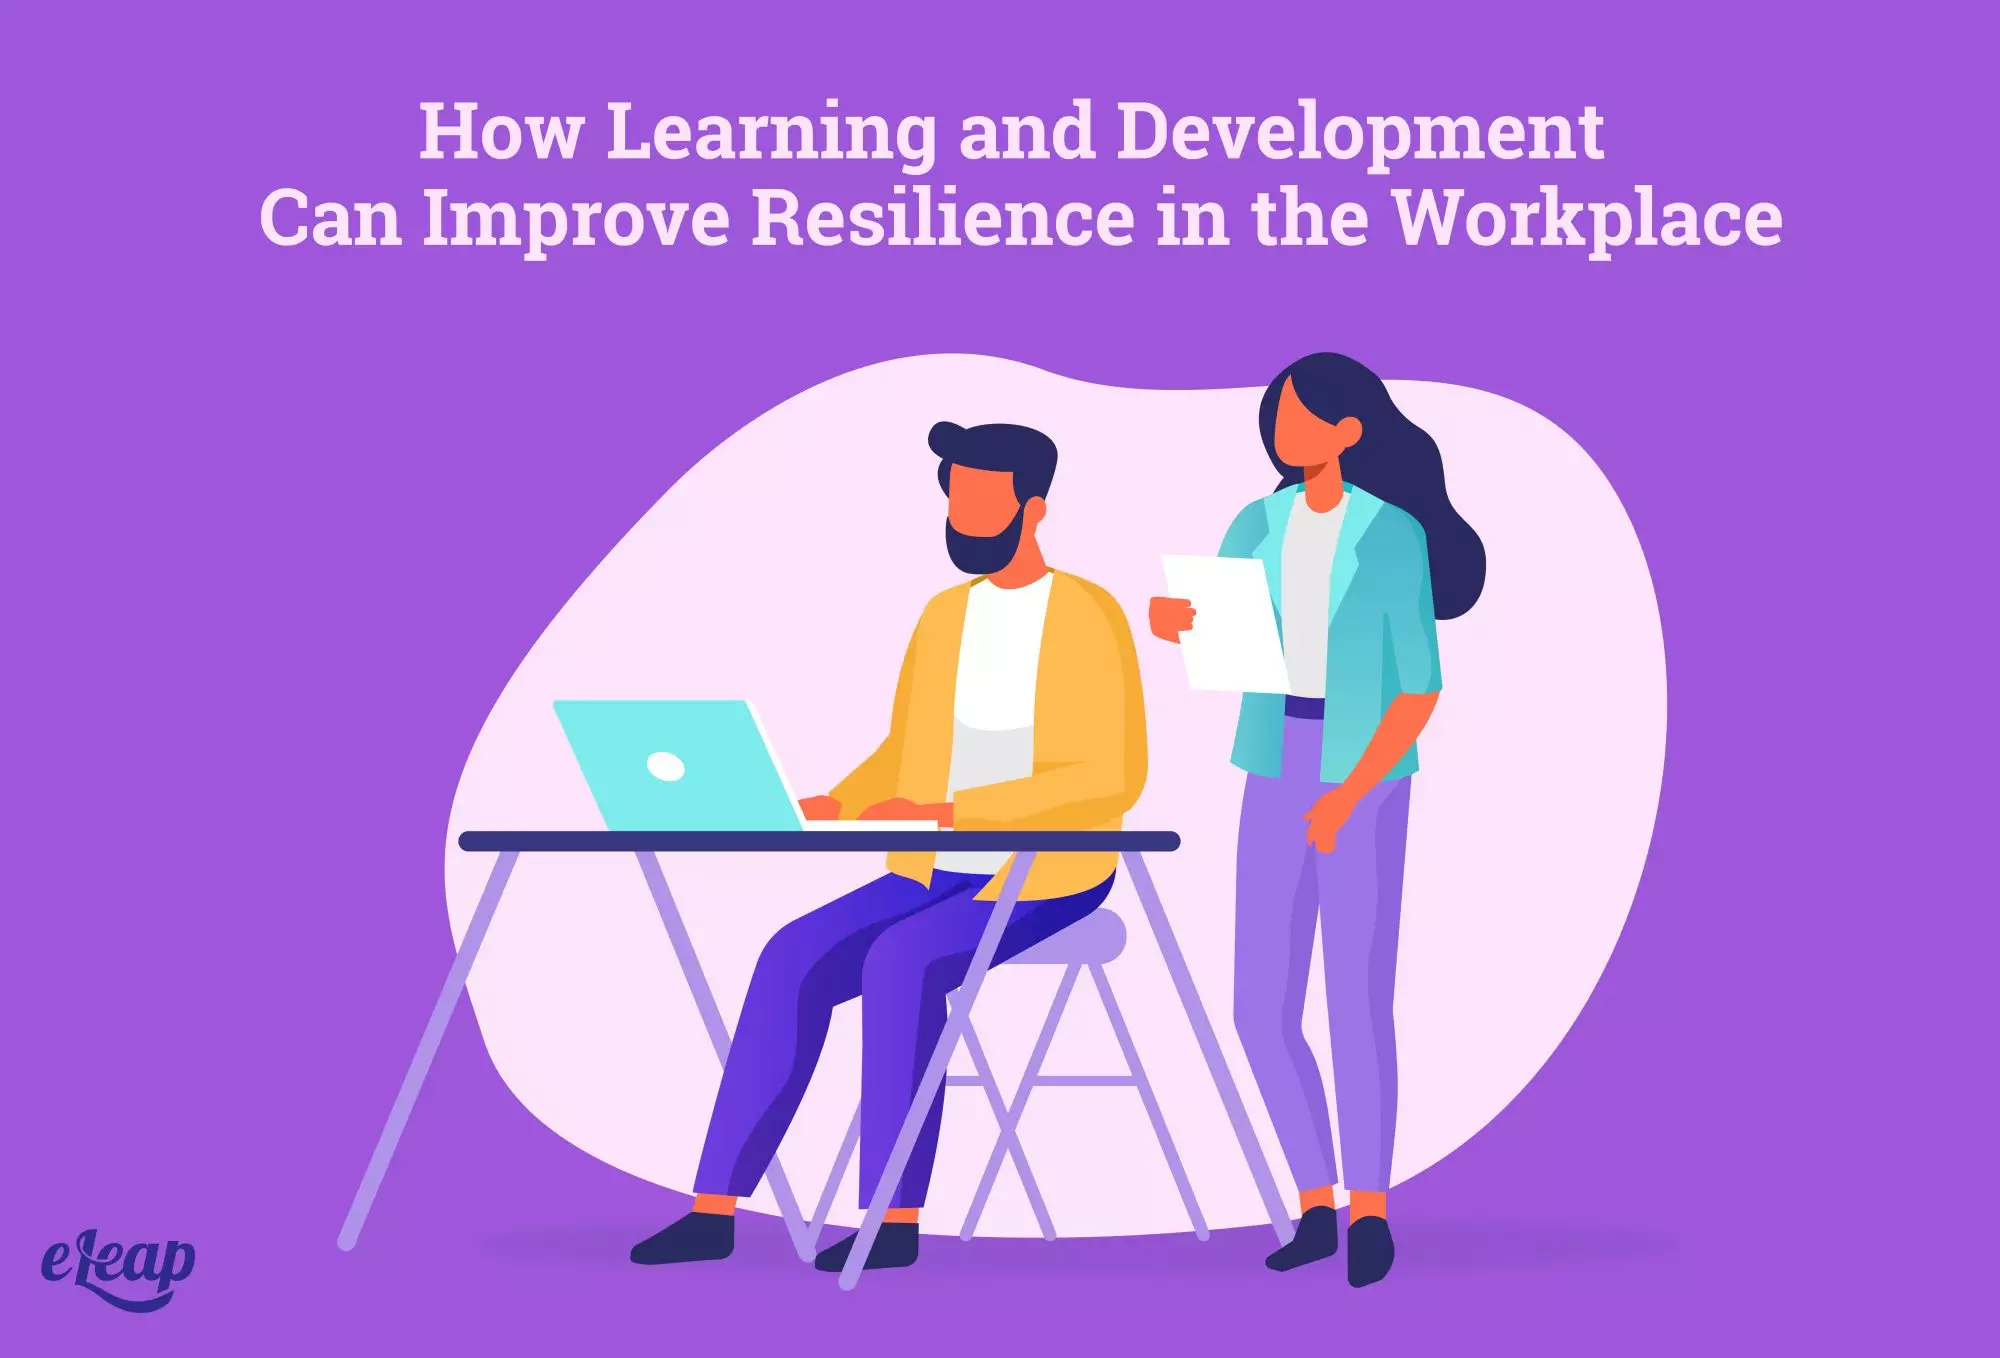 How Learning and Development Can Improve Resilience in the Workplace